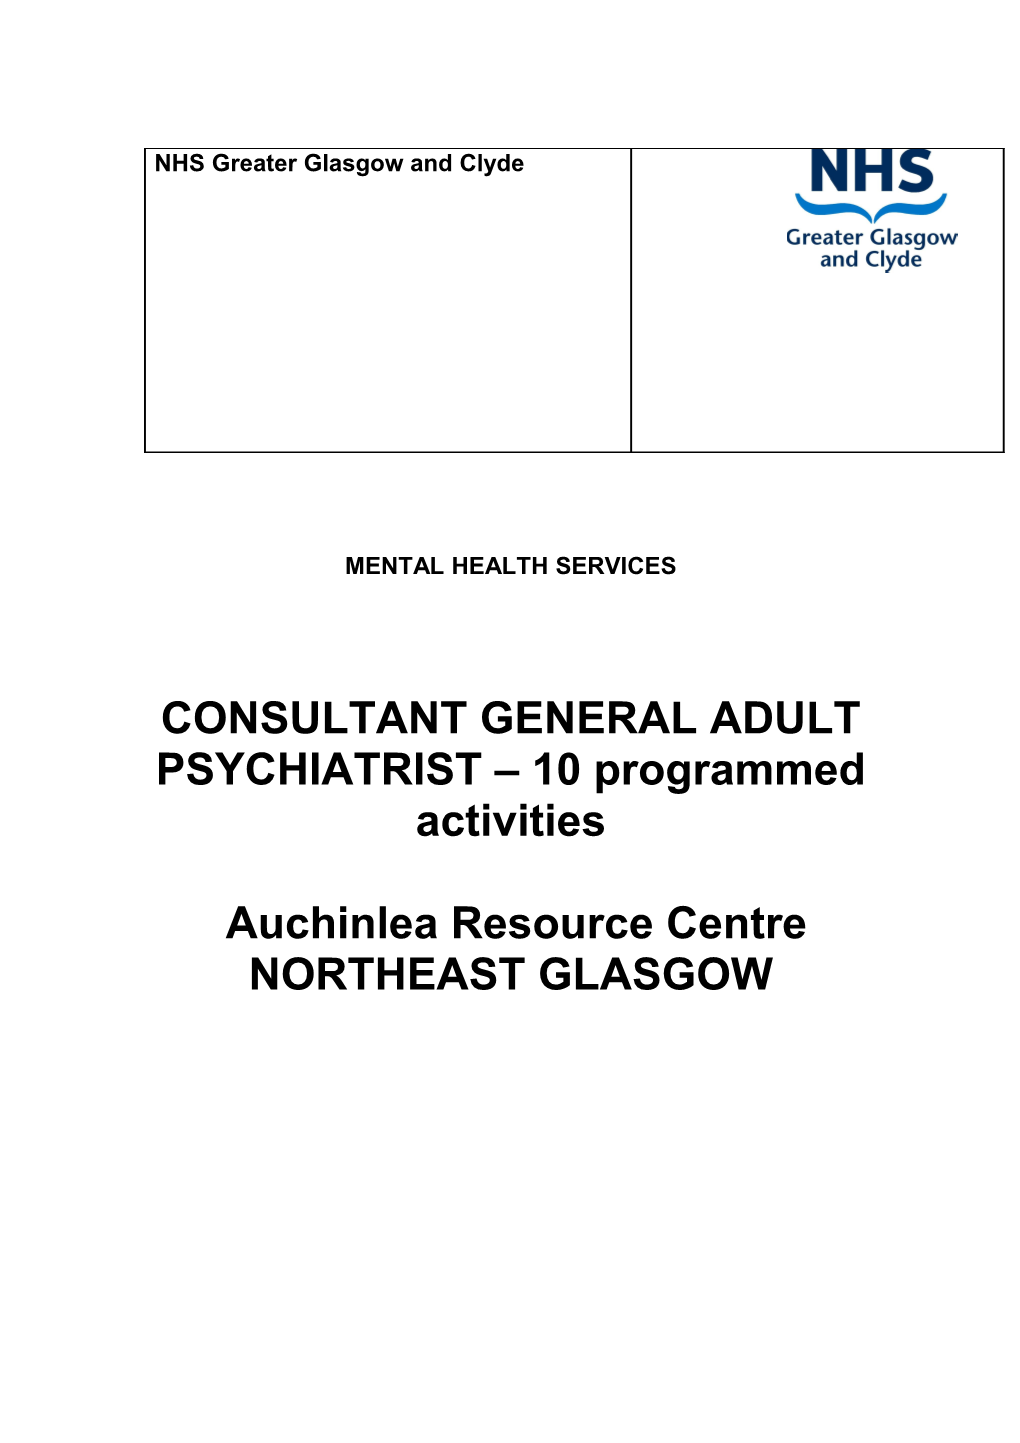 Consultant in General Adult Psychiatry